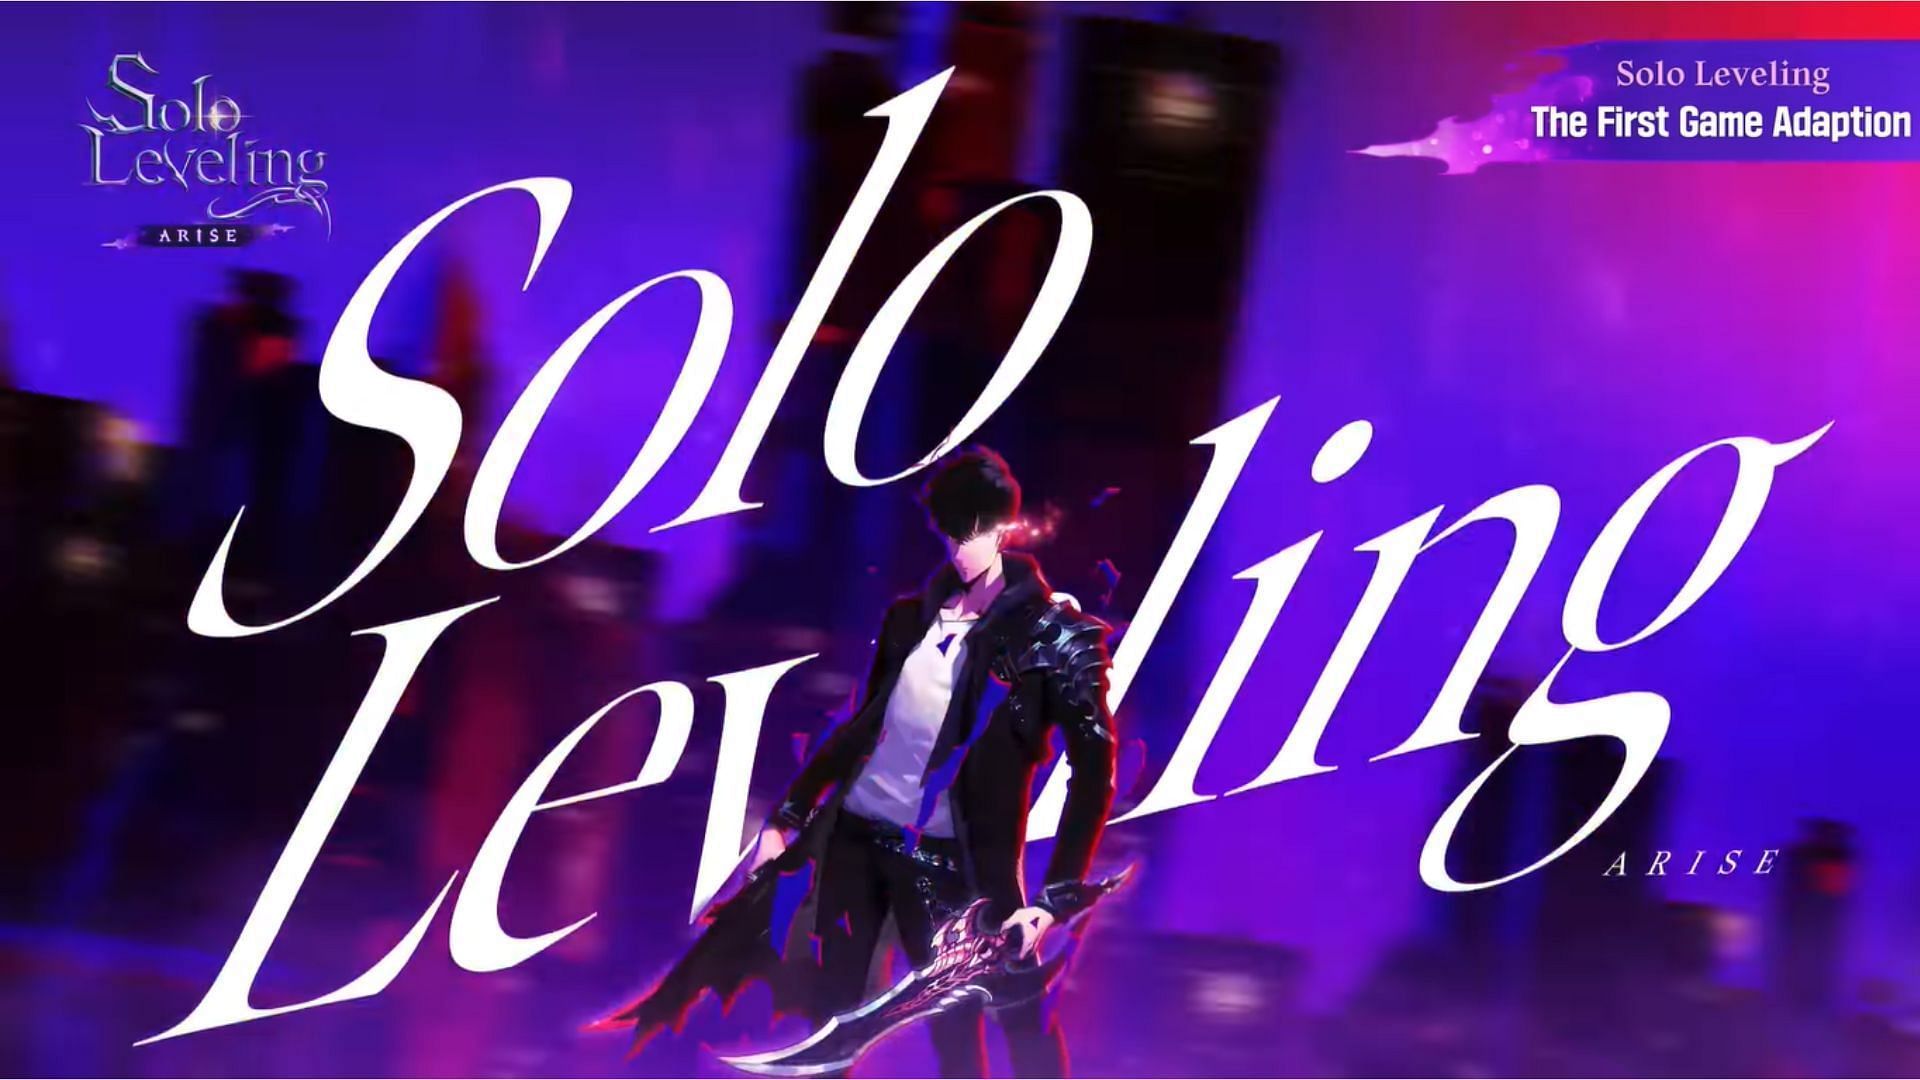 Solo Leveling:Arise redeem codes